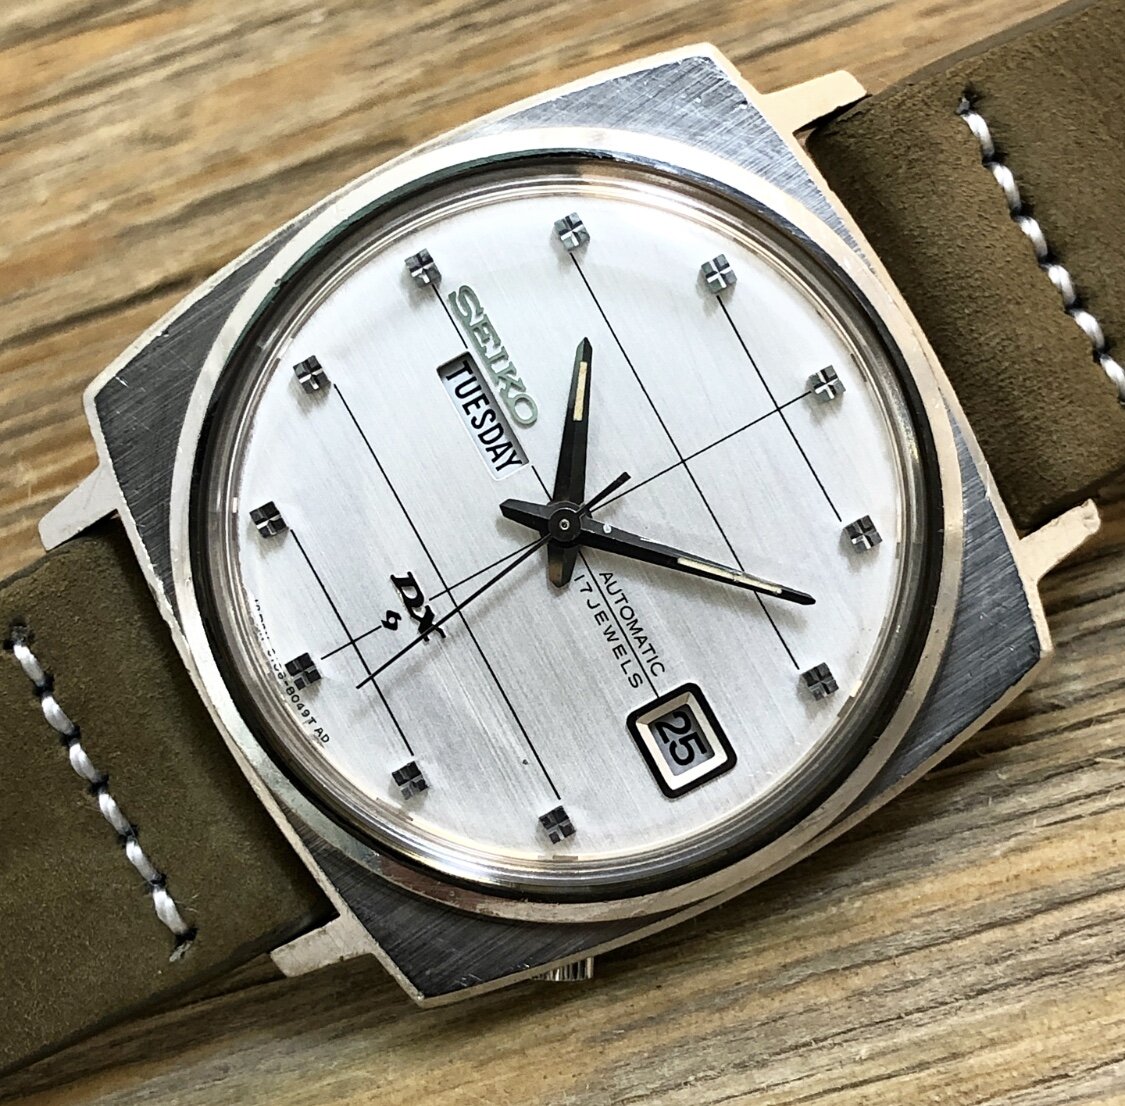 1968 Seiko 6106-8039 “DX” Automatic Day/Date